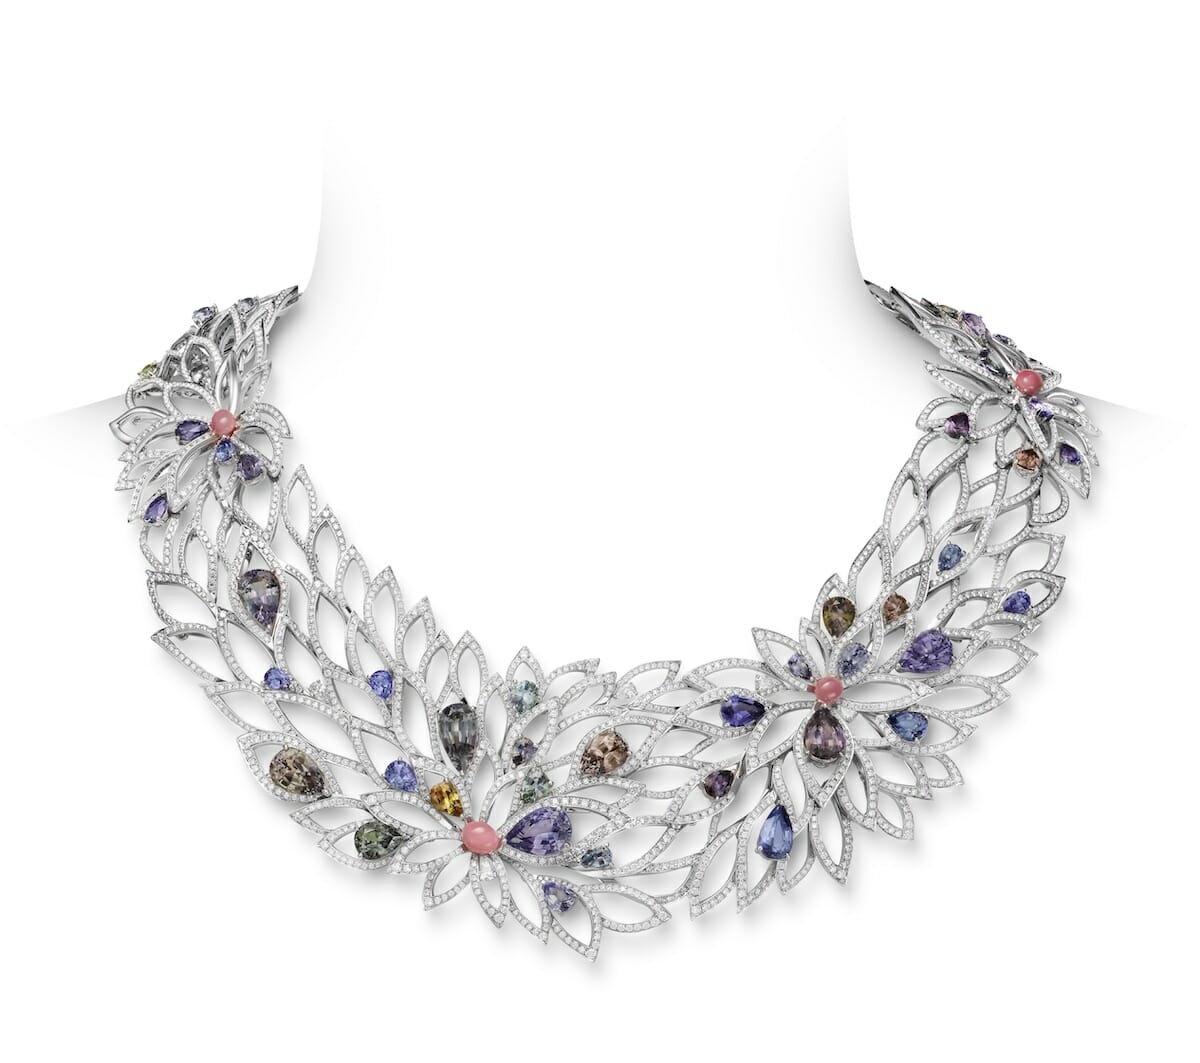 The Best Diamonds from the June and July 2021 High-Jewelry Collections -  Only Natural Diamonds